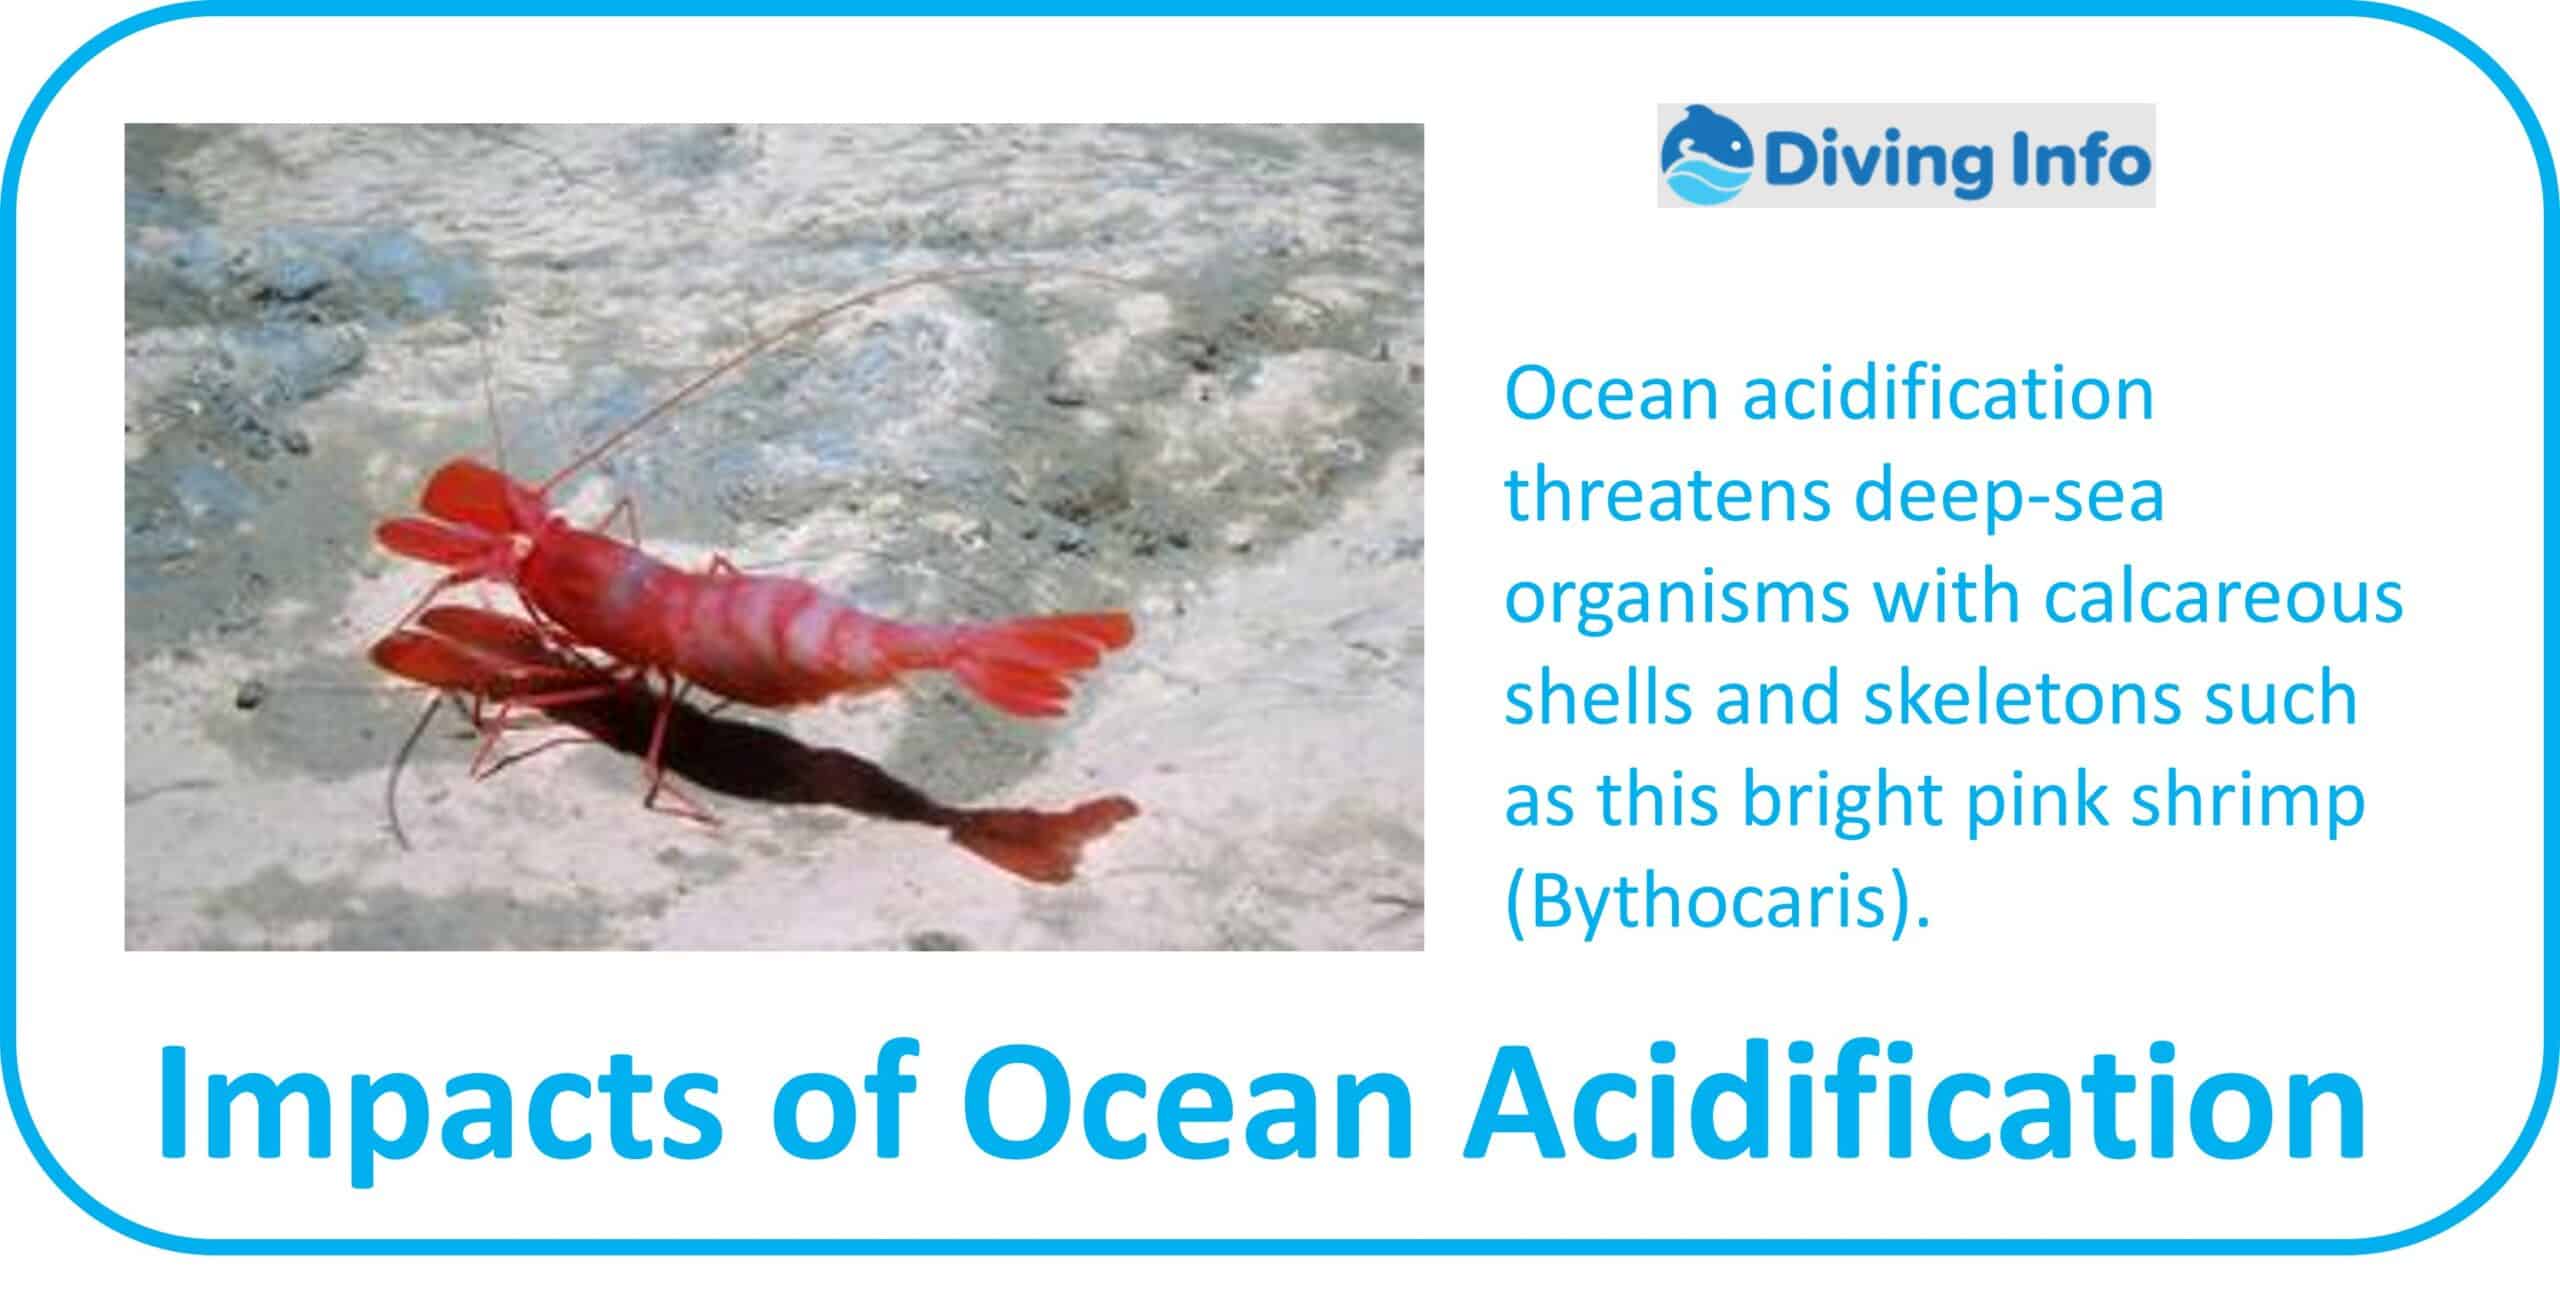 Impacts of Ocean Acidification